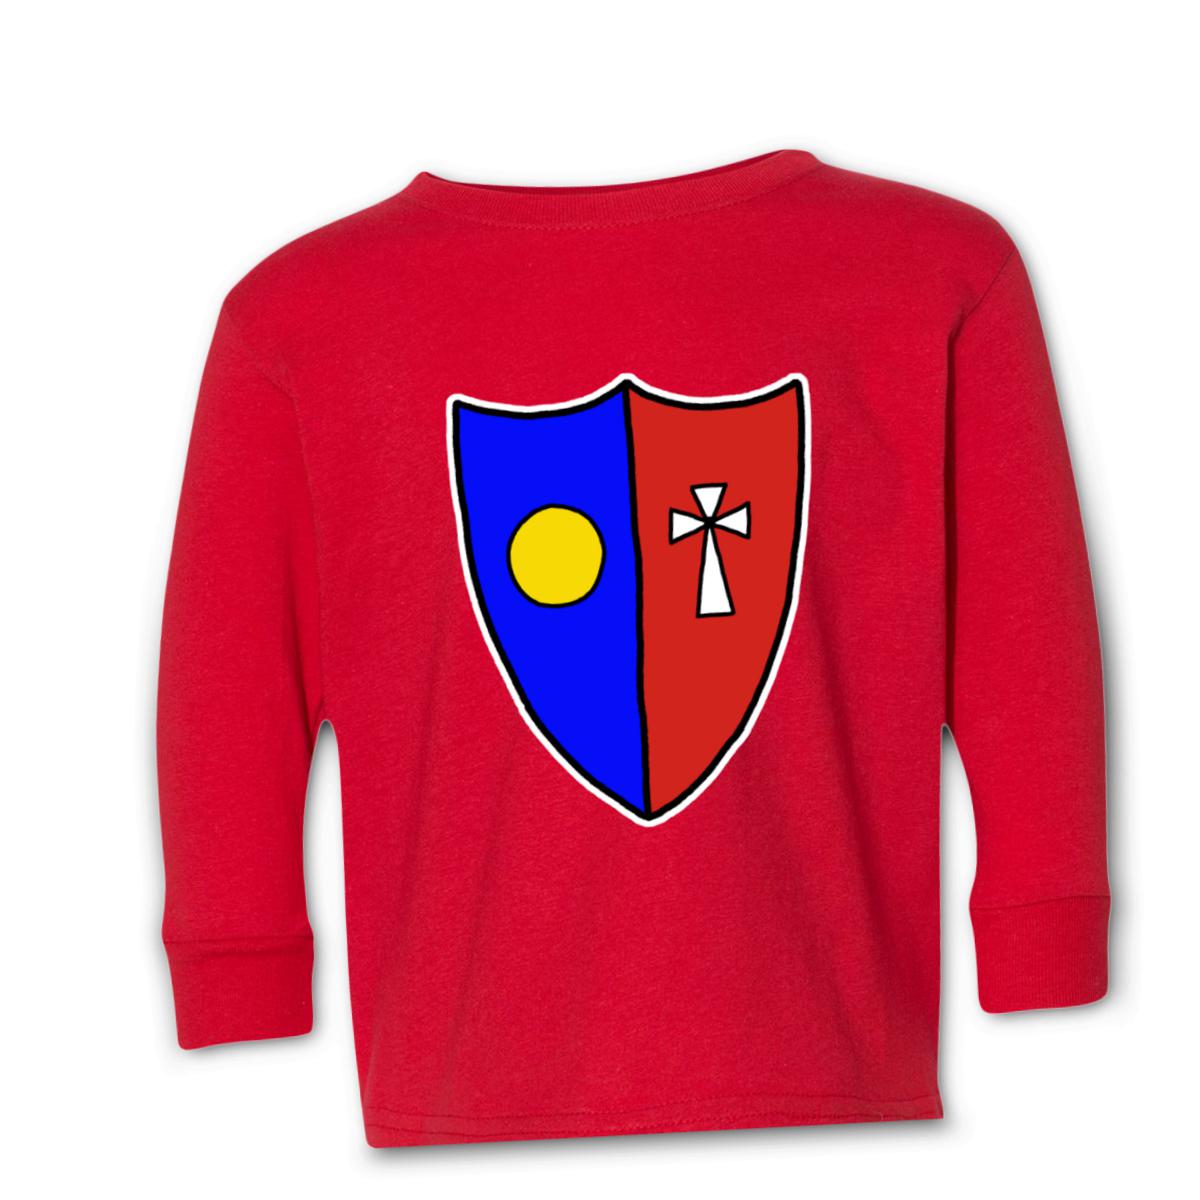 Shield Toddler Long Sleeve Tee 2T red